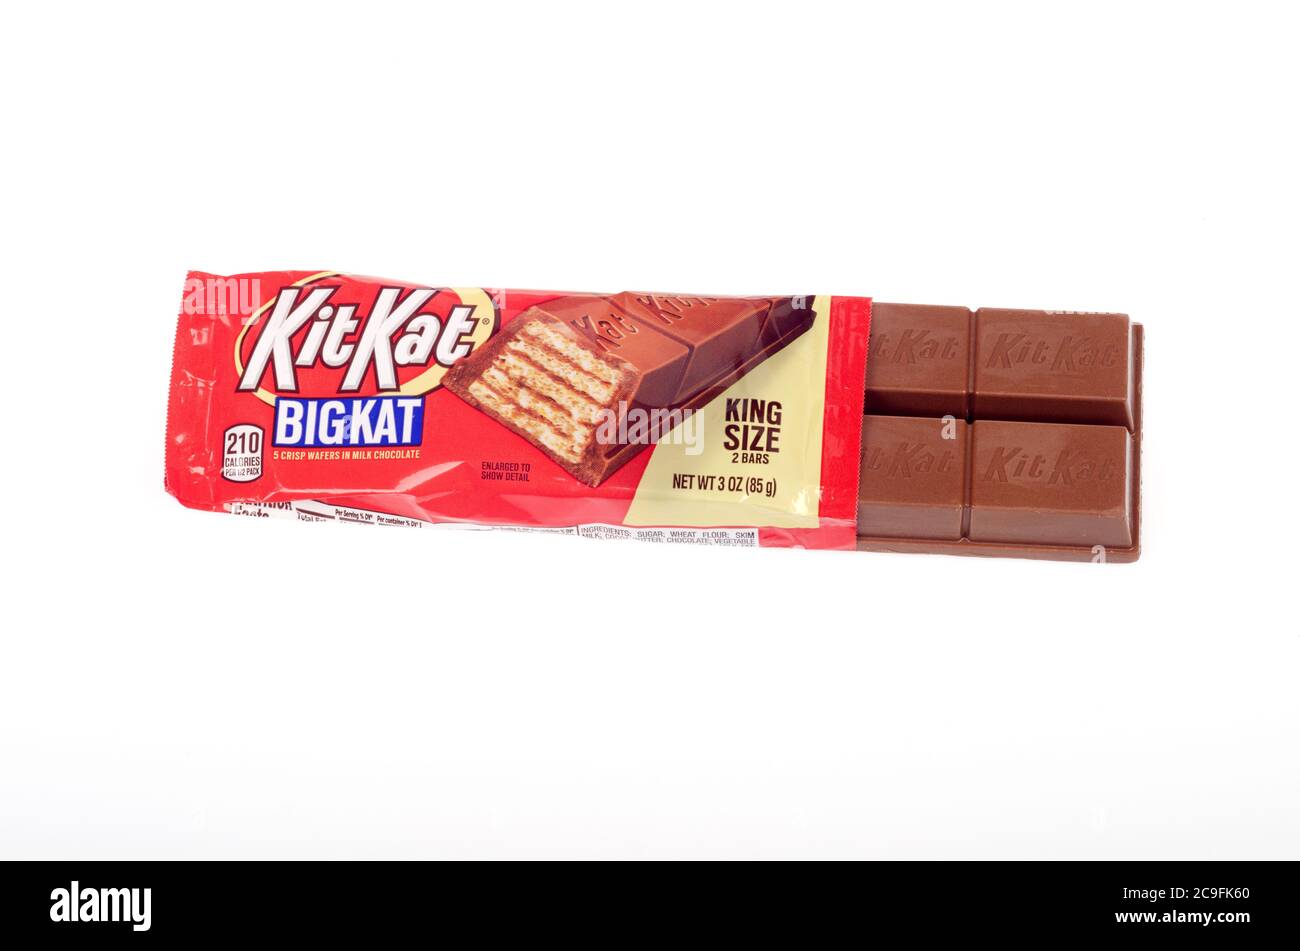 Hershey’s Kit Kat Big Kat with wrapper opened showing candy bar of crisp wafers in milk chocolate Stock Photo